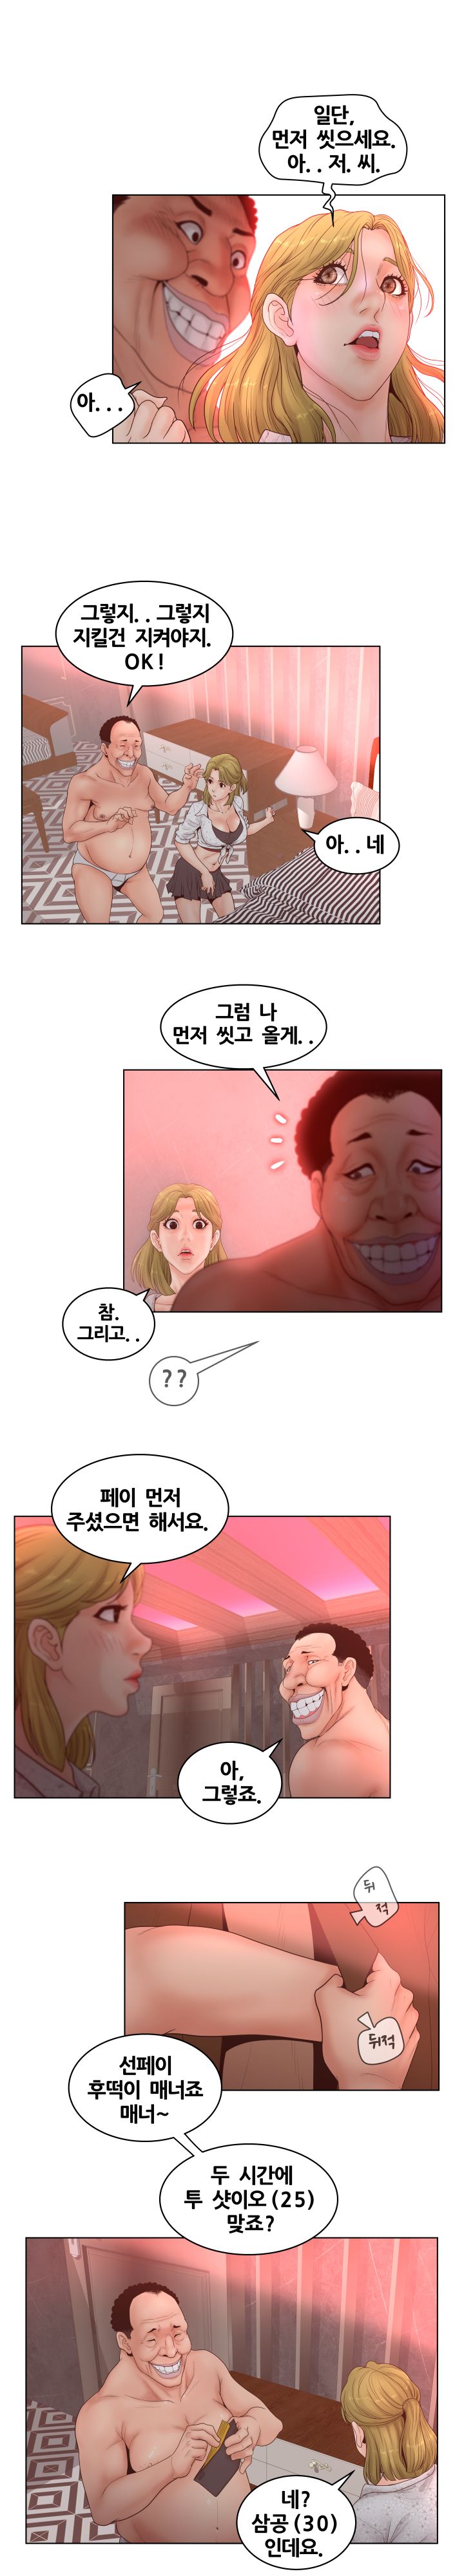 Share Girls Raw - Chapter 5 Page 2